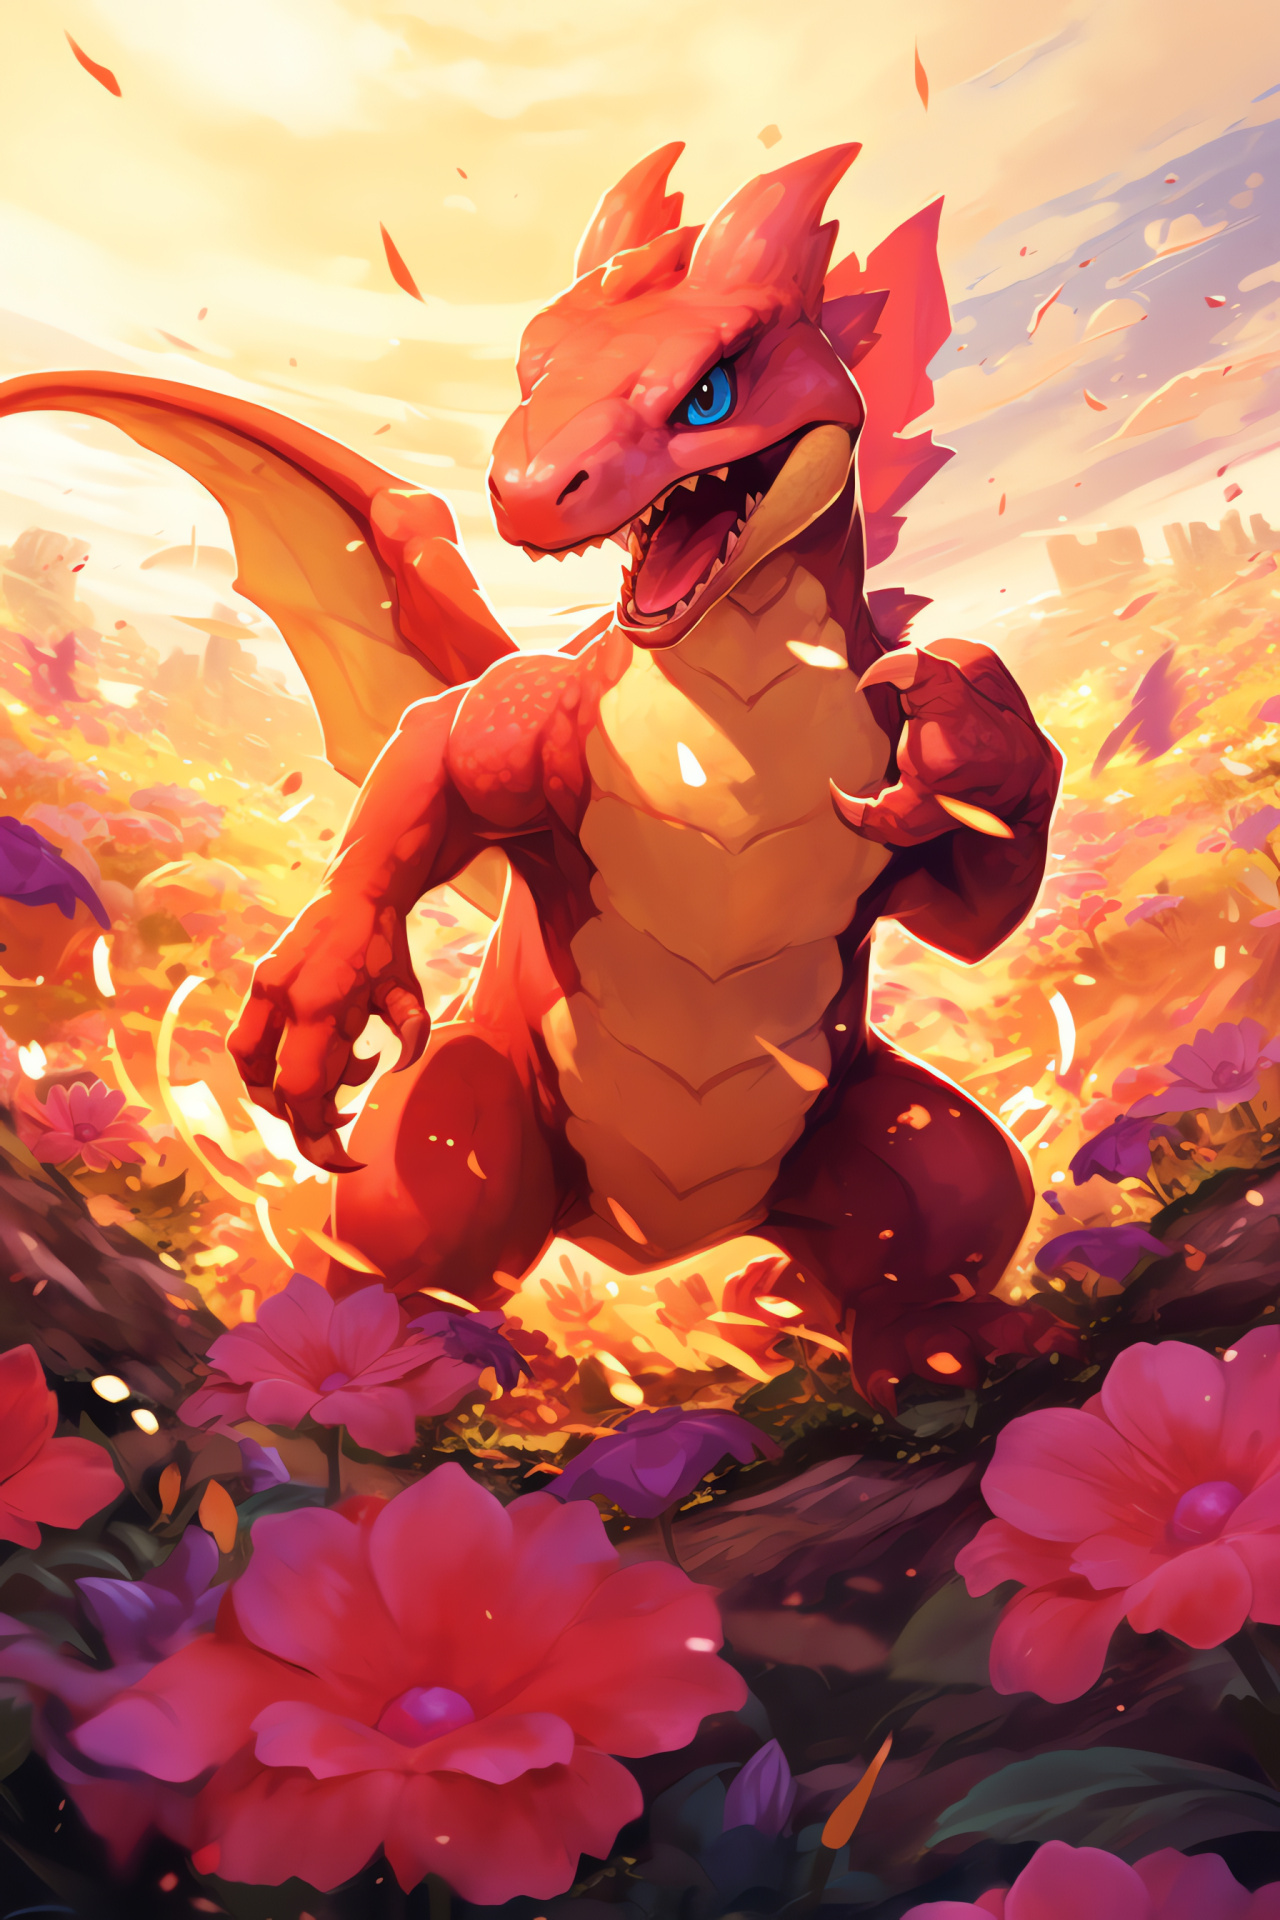 Charmeleon presence, Blossoming flora, Incandescent tail glow, Dragon-type move spectacle, Seismic battle impact, HD Phone Image